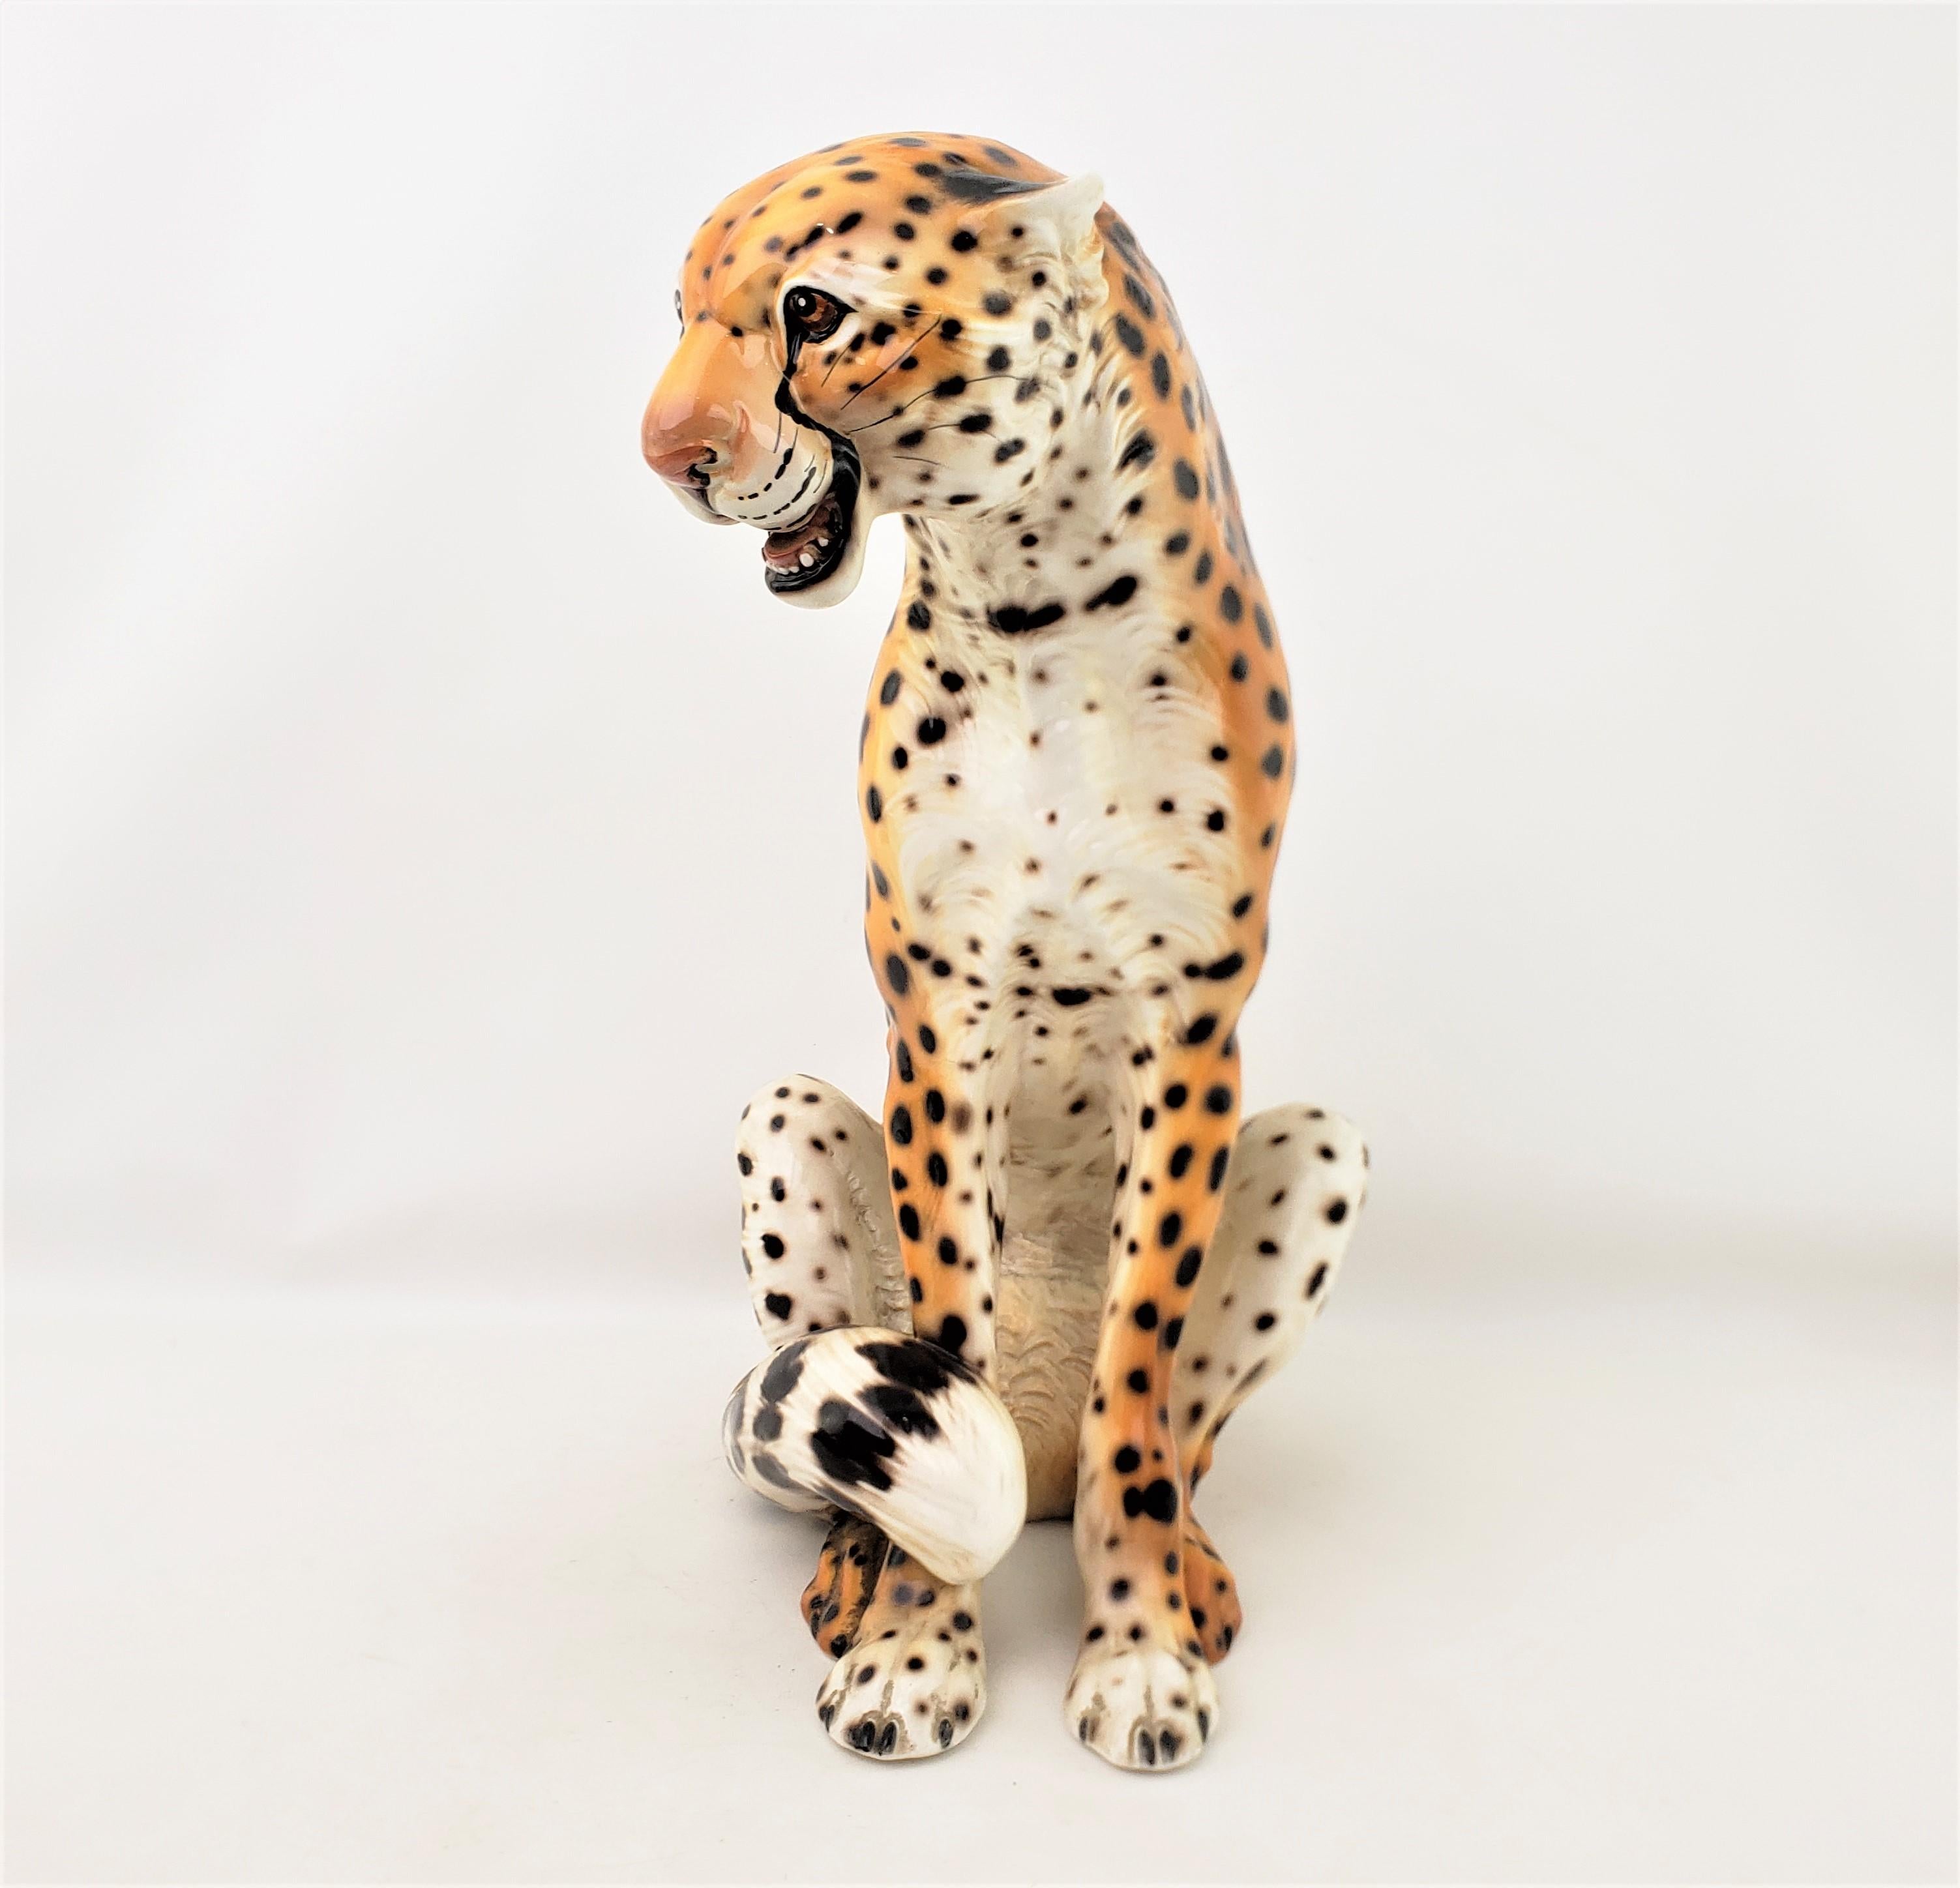 This sizable ceramic and well executed Cheetah sculpture is signed by the maker Ronzan of Italy and dates to approximately 1960 and done in the period Mid-Century Modern style. The sculpture is done in a detailed molded ceramic which has been